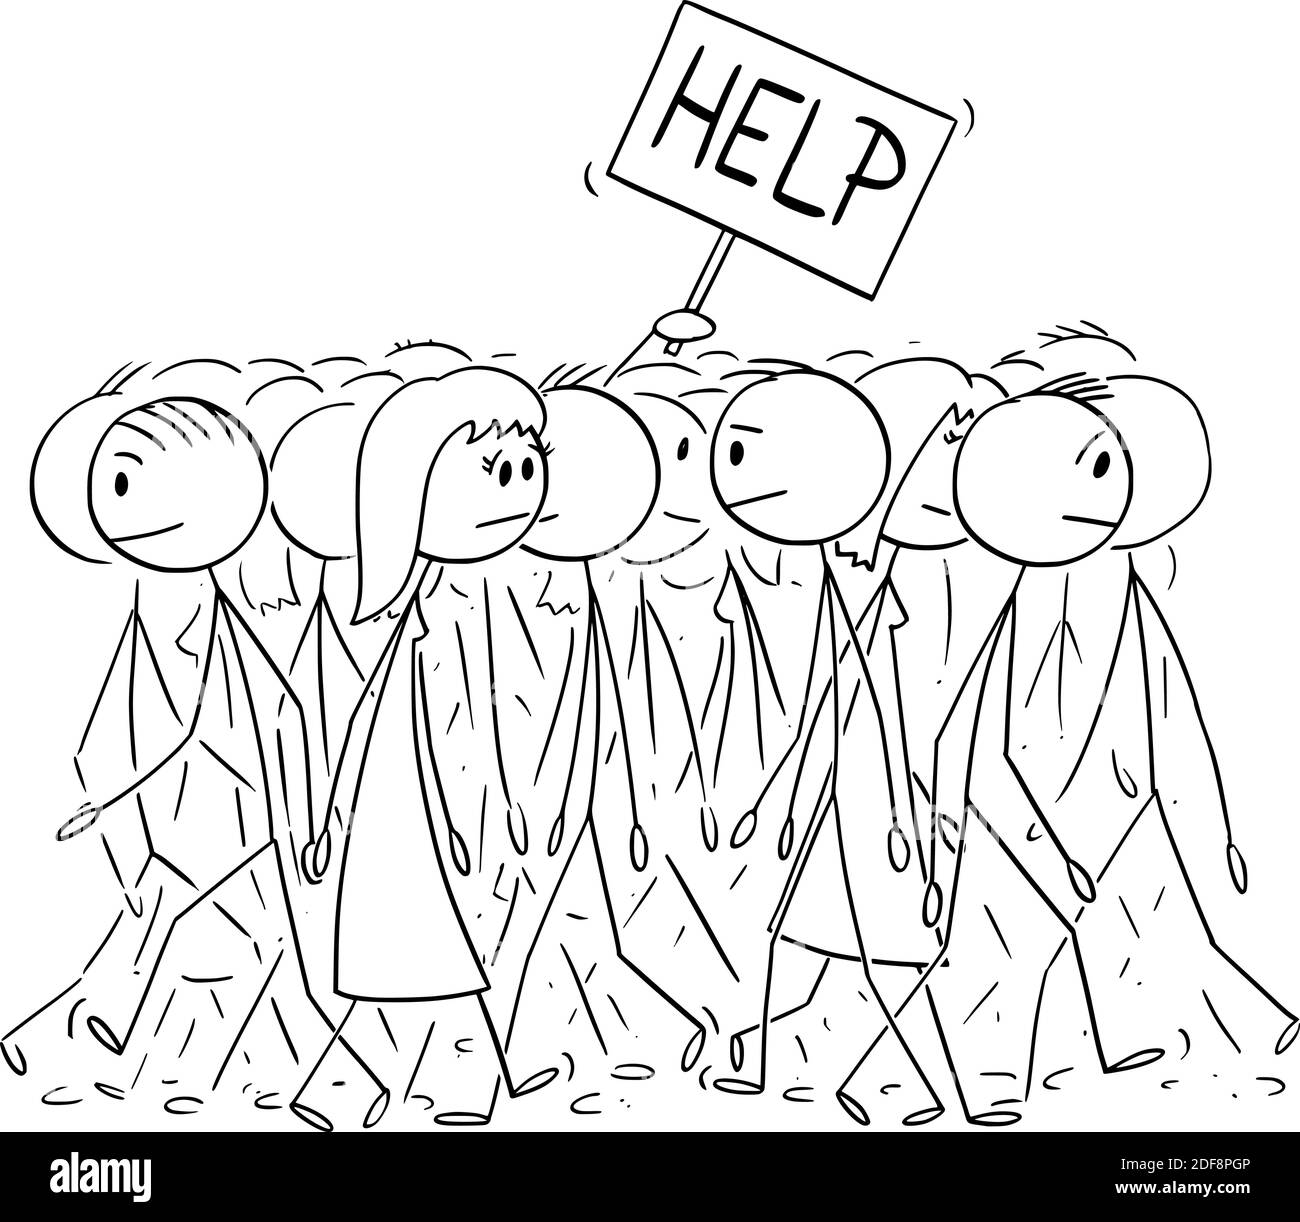 Vector cartoon stick figure illustration of anonymous crowd of people walking on street, hand sticking out with help sign.Concept of loneliness and individuality. Stock Vector